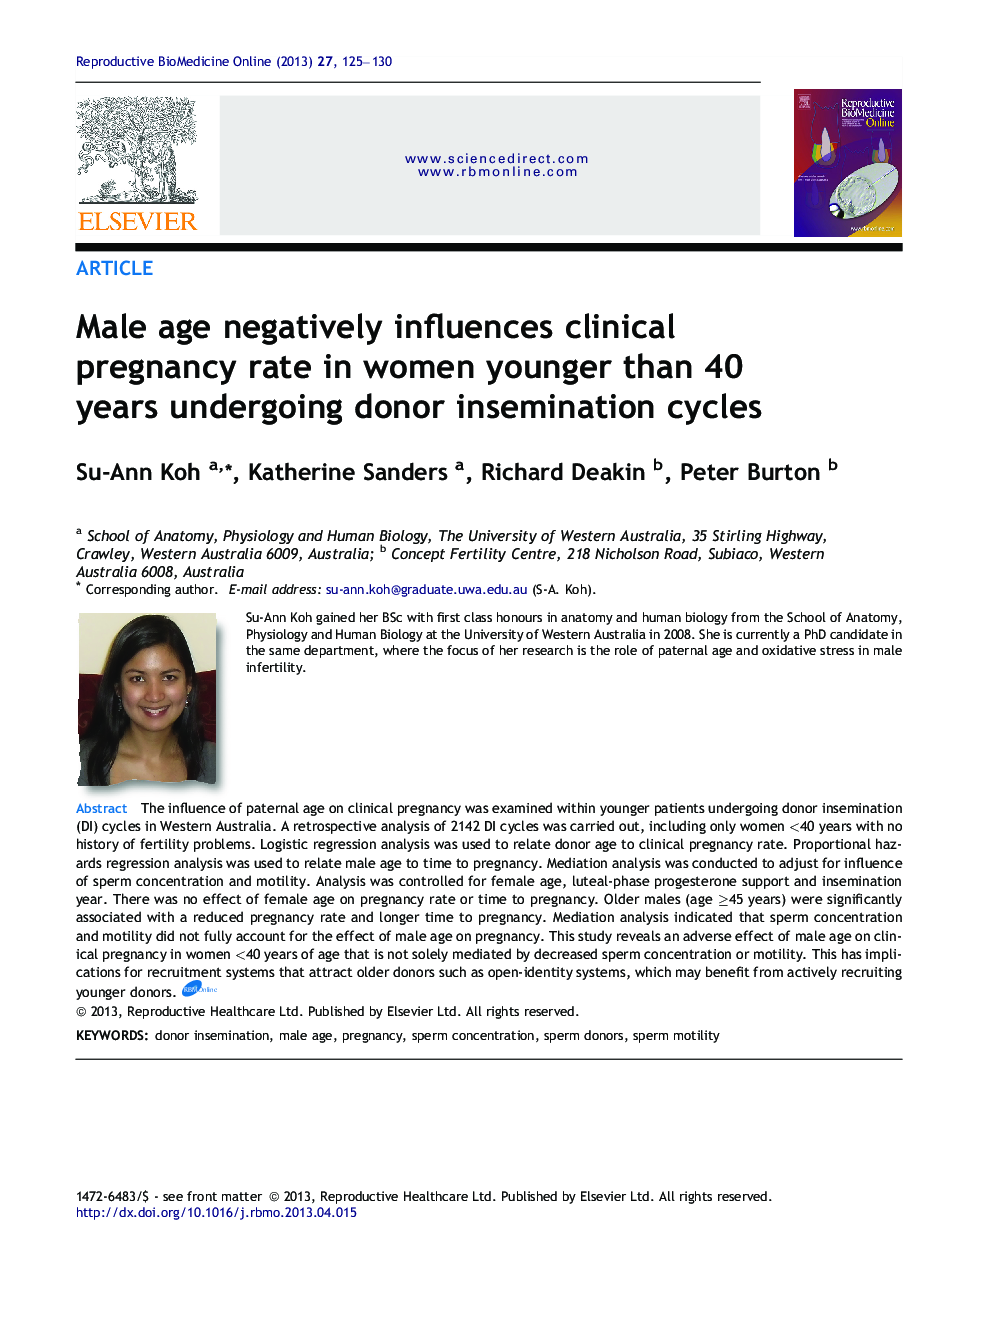 Male age negatively influences clinical pregnancy rate in women younger than 40 years undergoing donor insemination cycles 